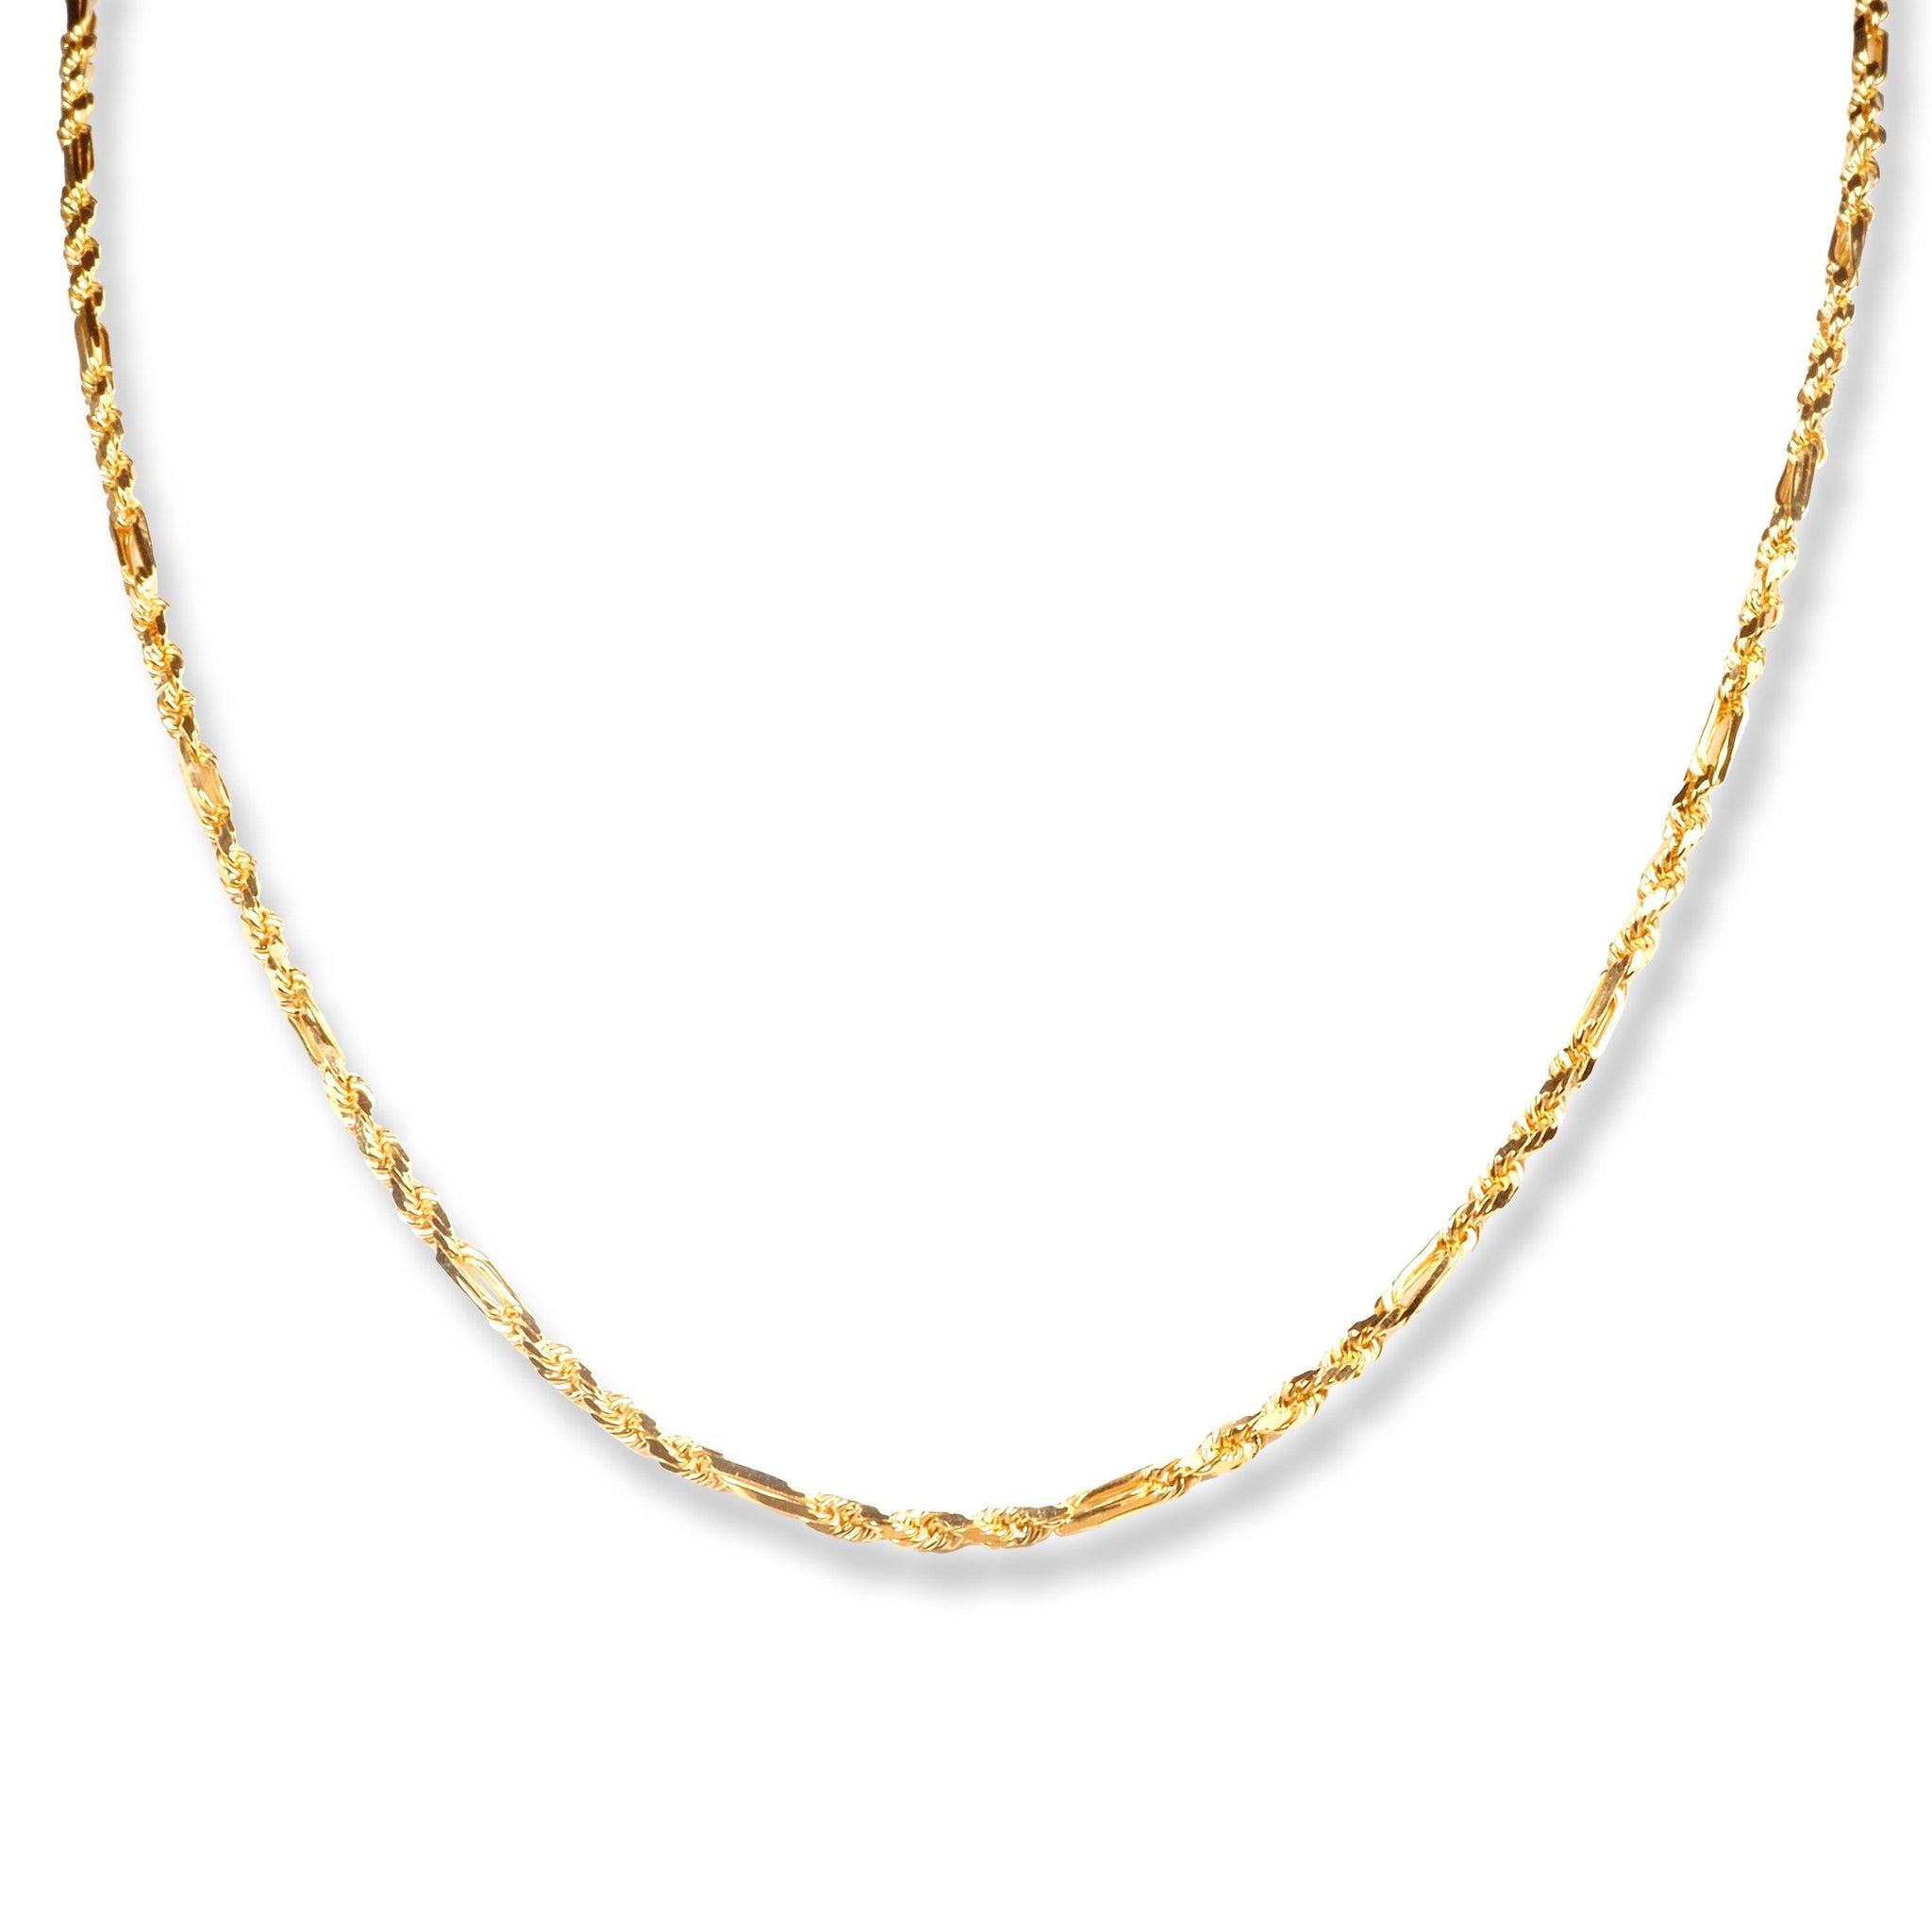 22ct Gold Fancy Rope Chain with Lobster Clasp C-7139